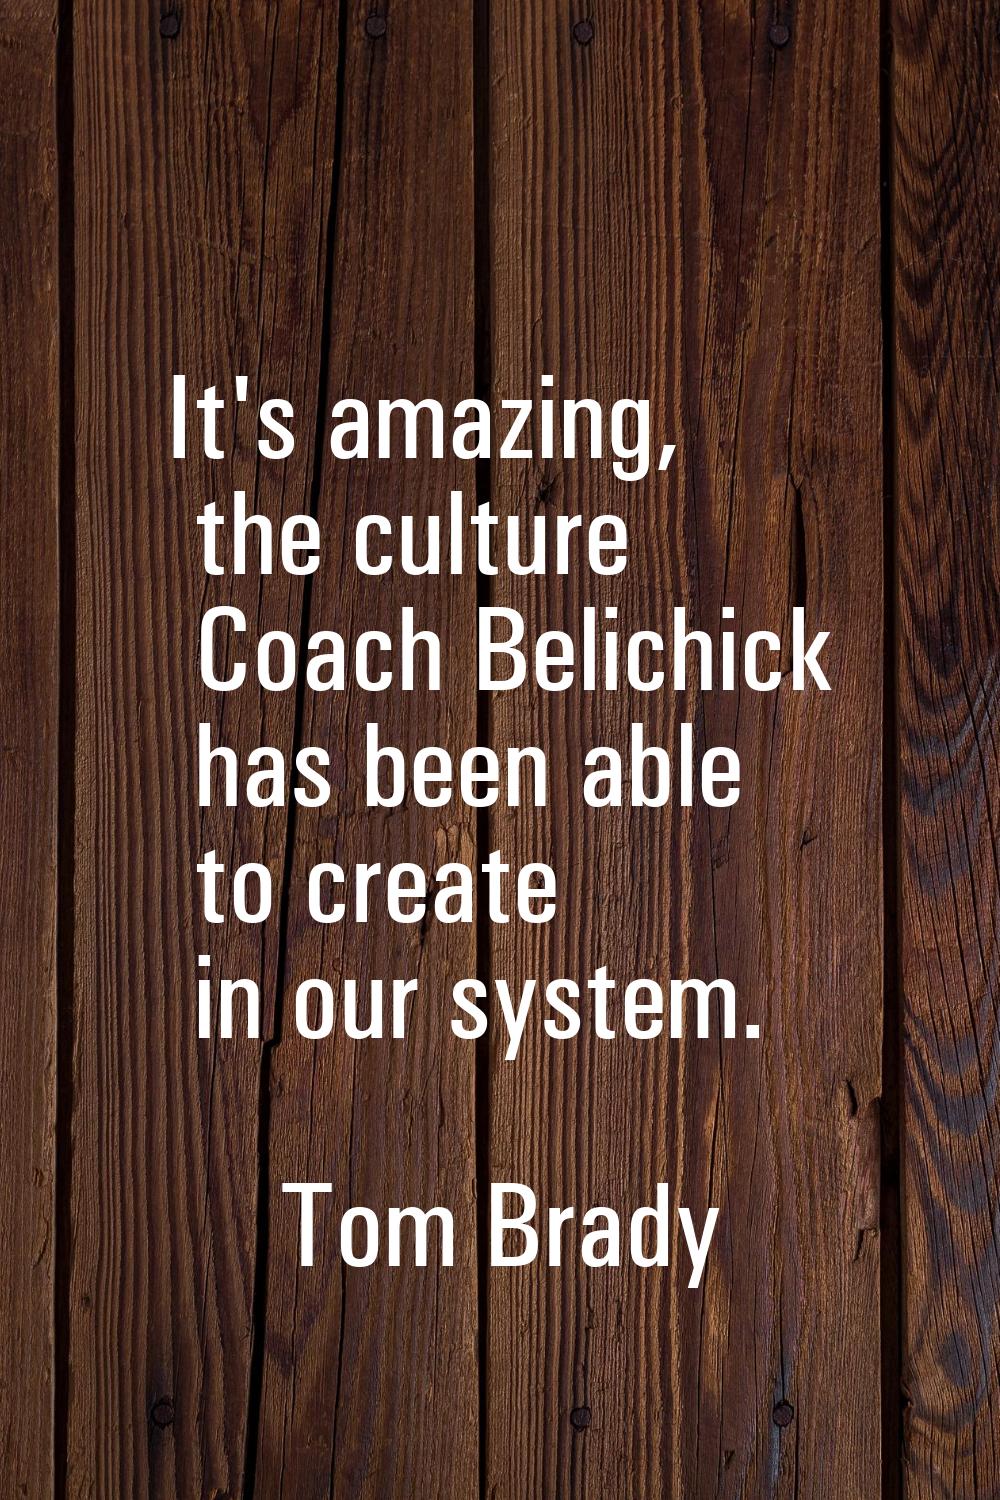 It's amazing, the culture Coach Belichick has been able to create in our system.